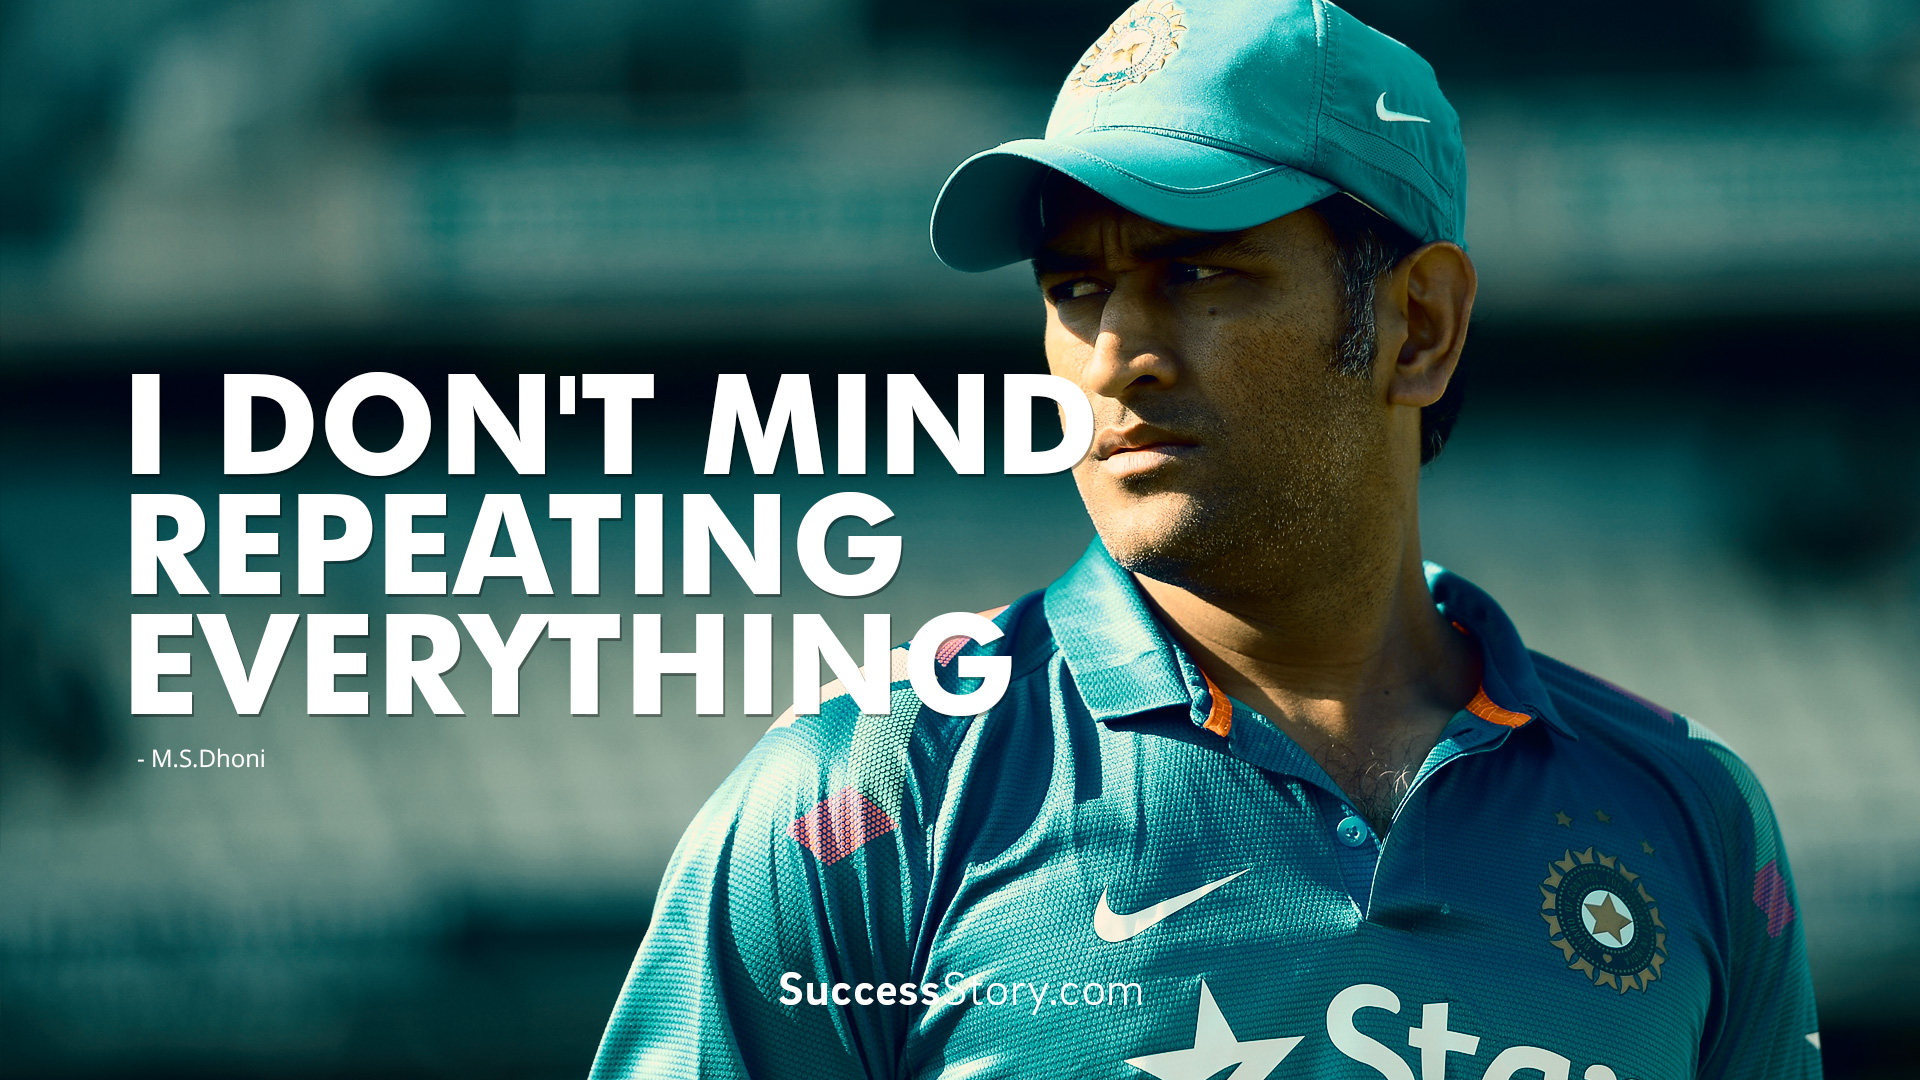 MS Dhoni - The king of modernised cricket